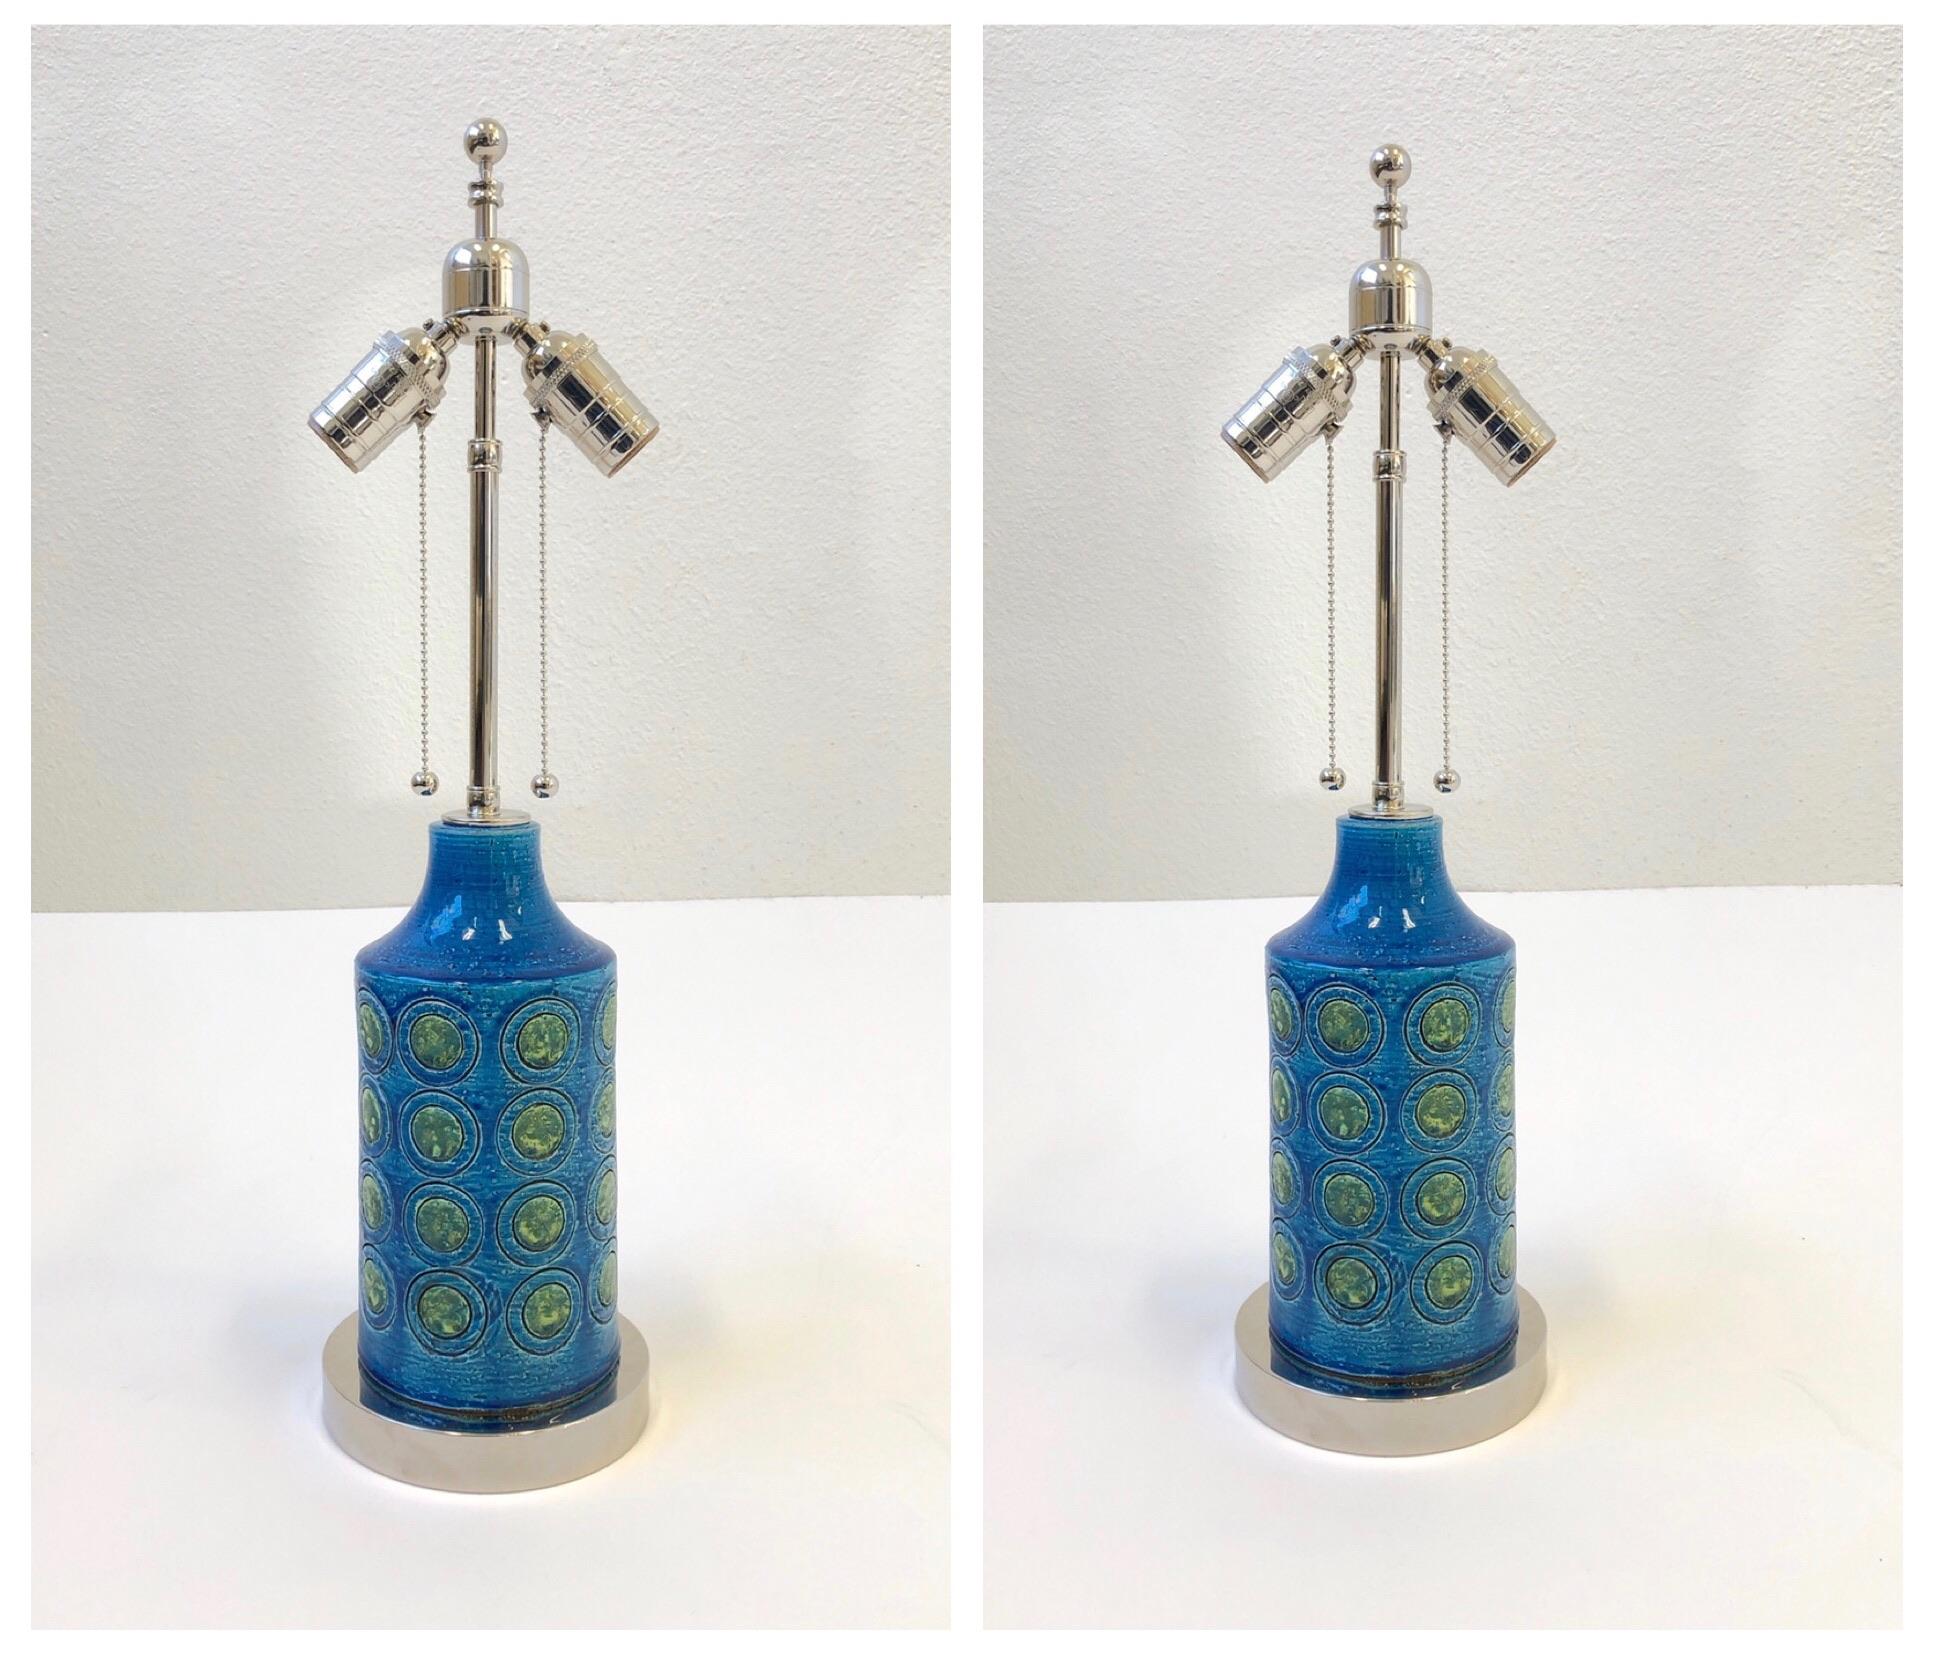 A beautiful pair of “Rimini Blue” table lamps designed by Bitossi in the 1960s. This lamps have been newly rewired with all new polished nickel hardware and new vanilla linen shades. 

Dimensions: 22.25” high, 16.25” diameter.